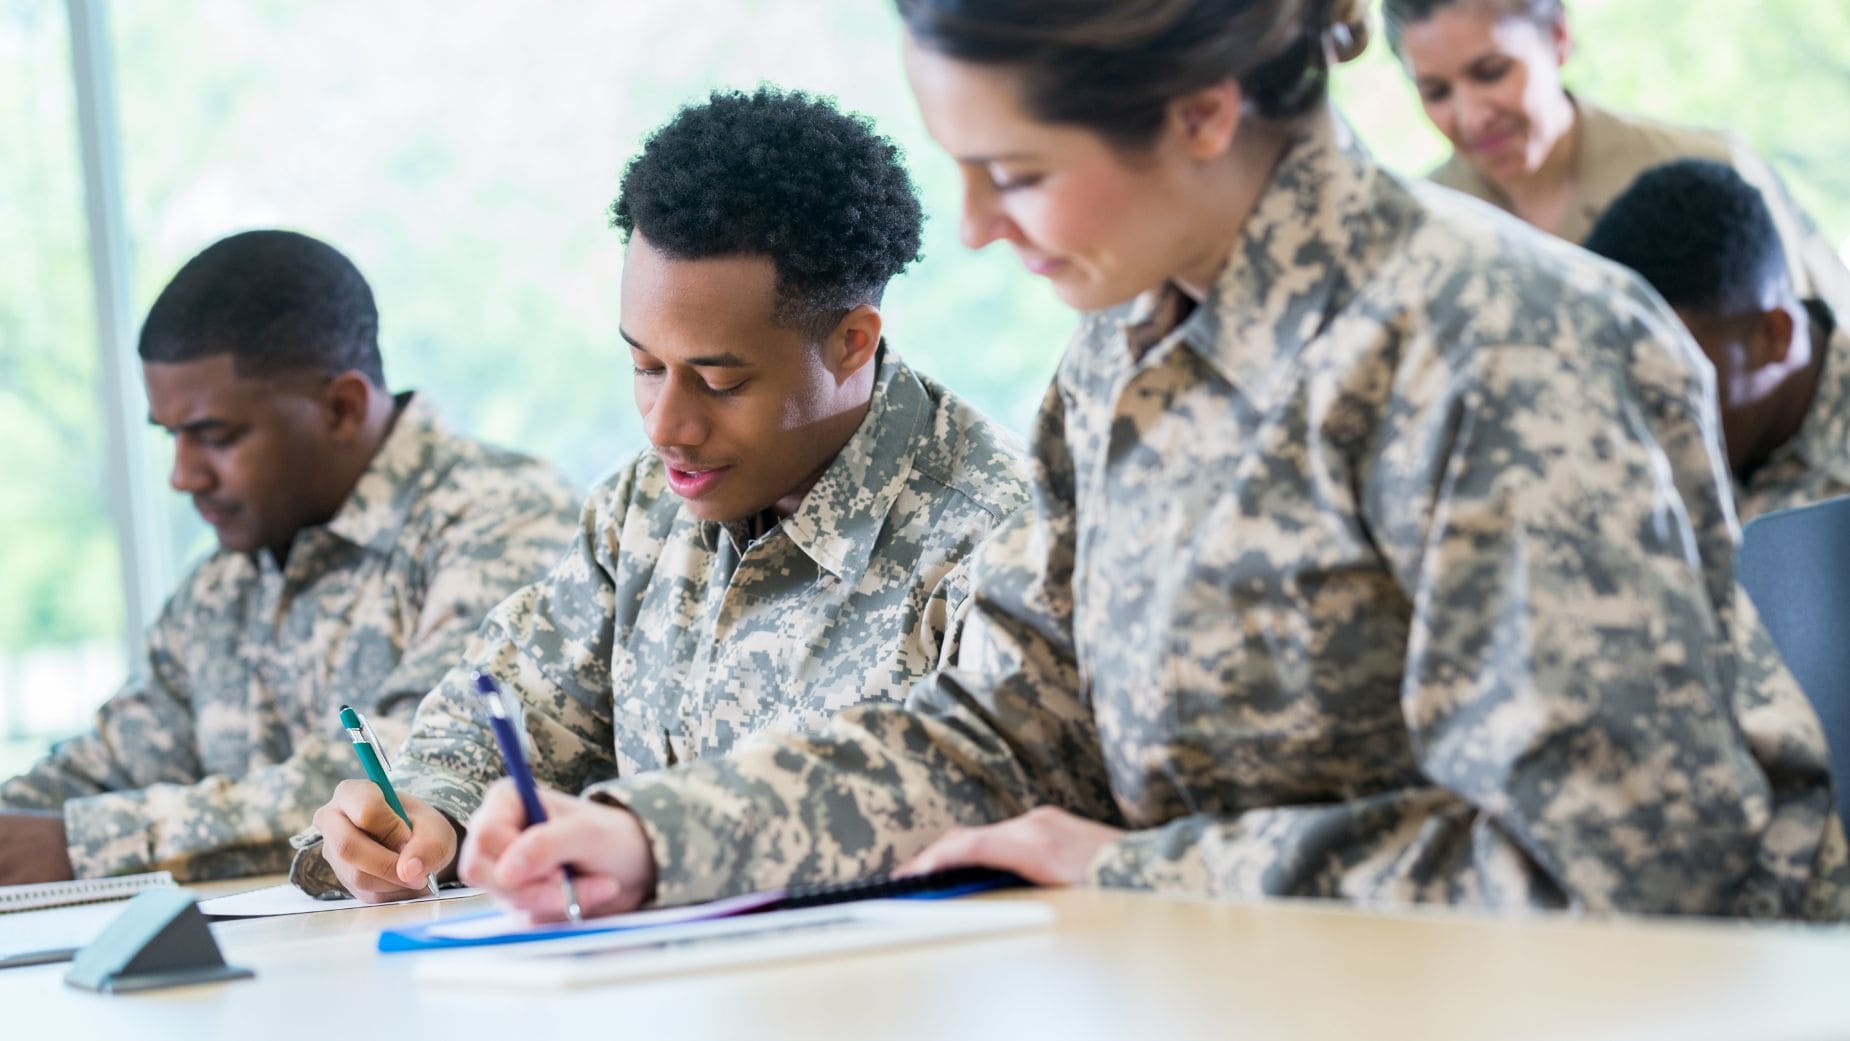 The IRS could grant a larger Tax Return to Military Families thanks to EITC